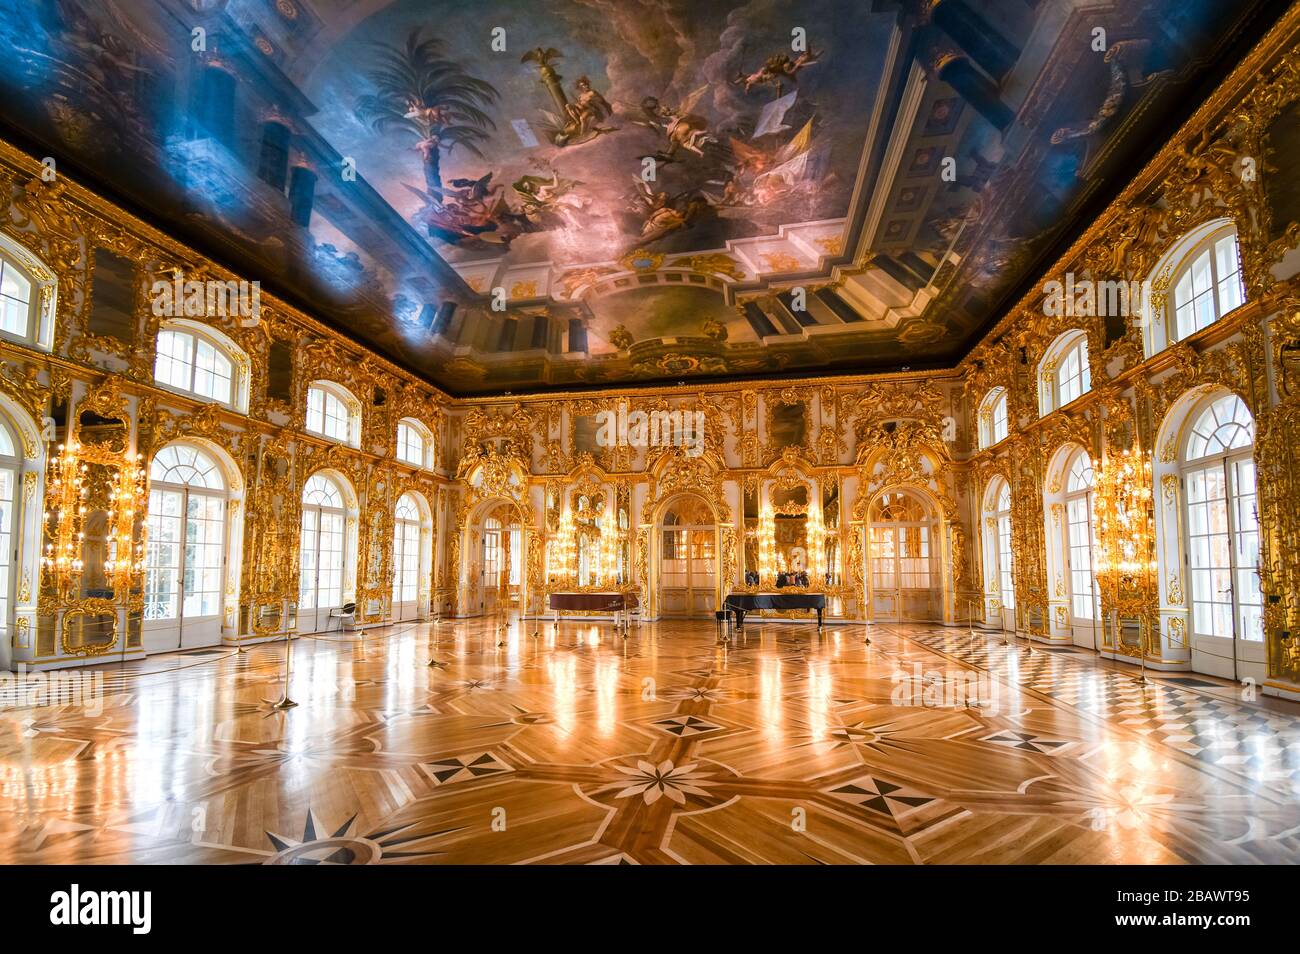 An ornate golden interior ballroom with a grand piano inside the Rococo Catherine Palace at Pushkin near St. Petersburg, Russia. Stock Photo